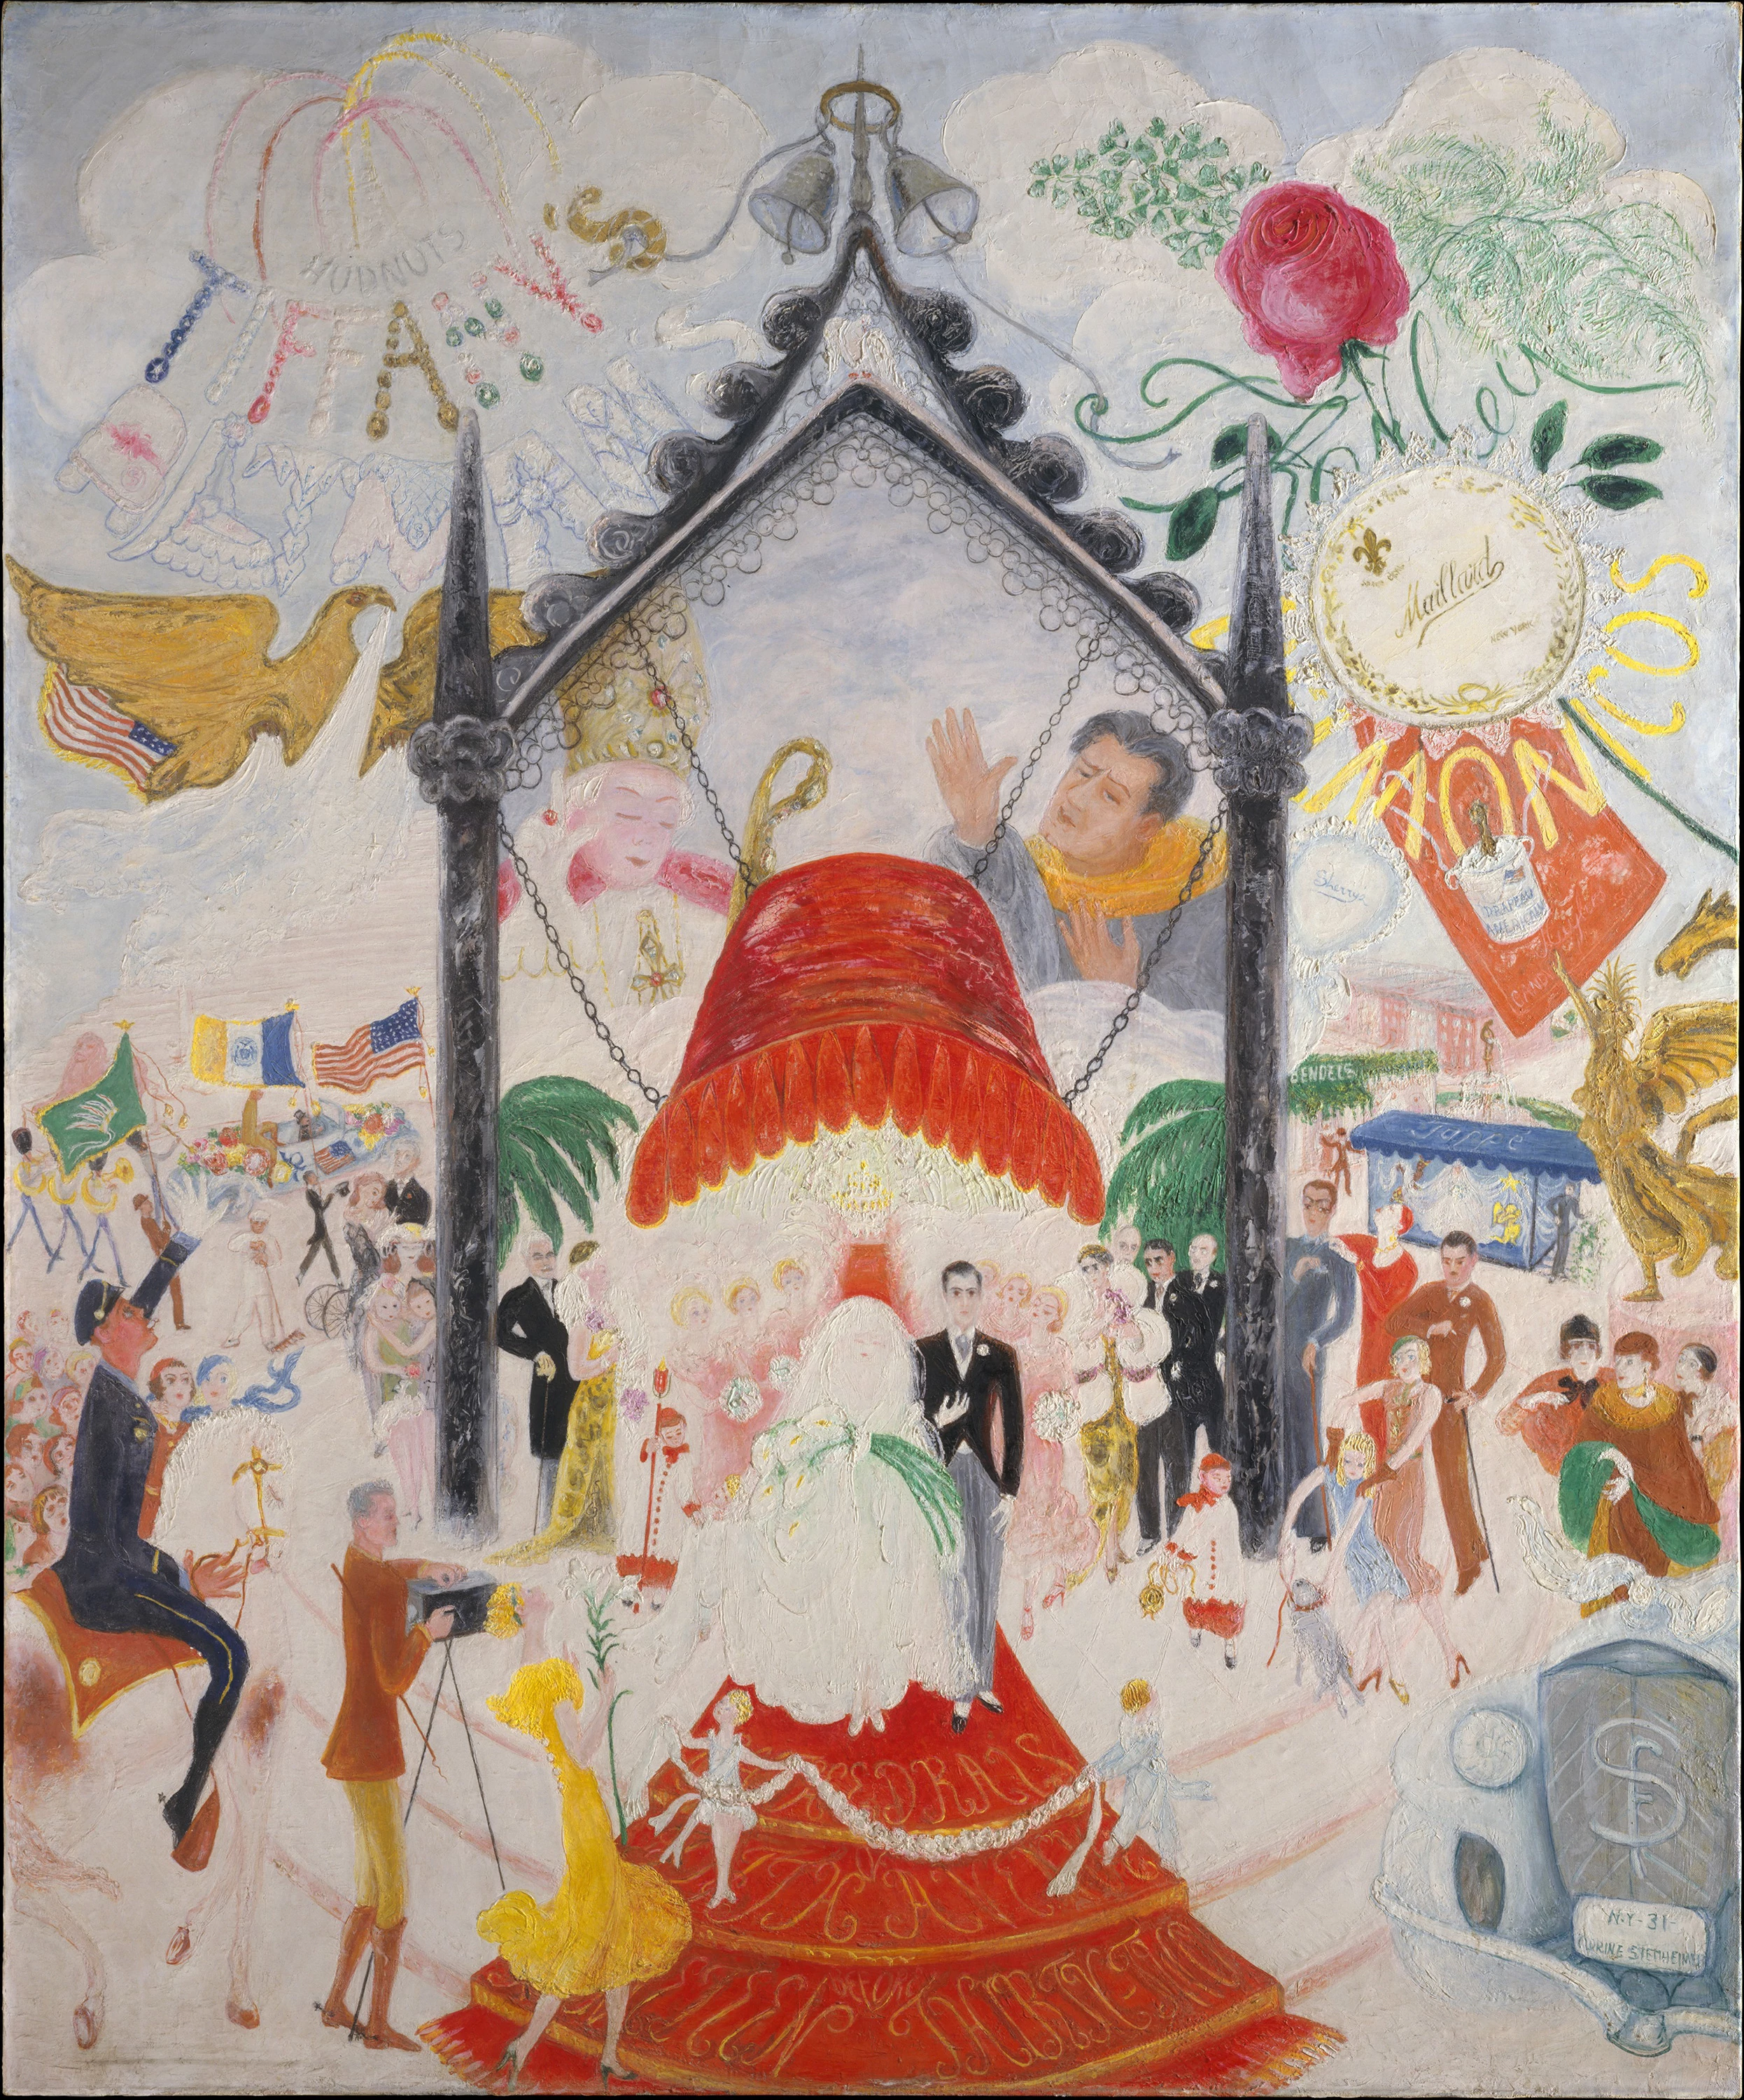 The Cathedrals of Fifth Avenue, Florine Stettheimer